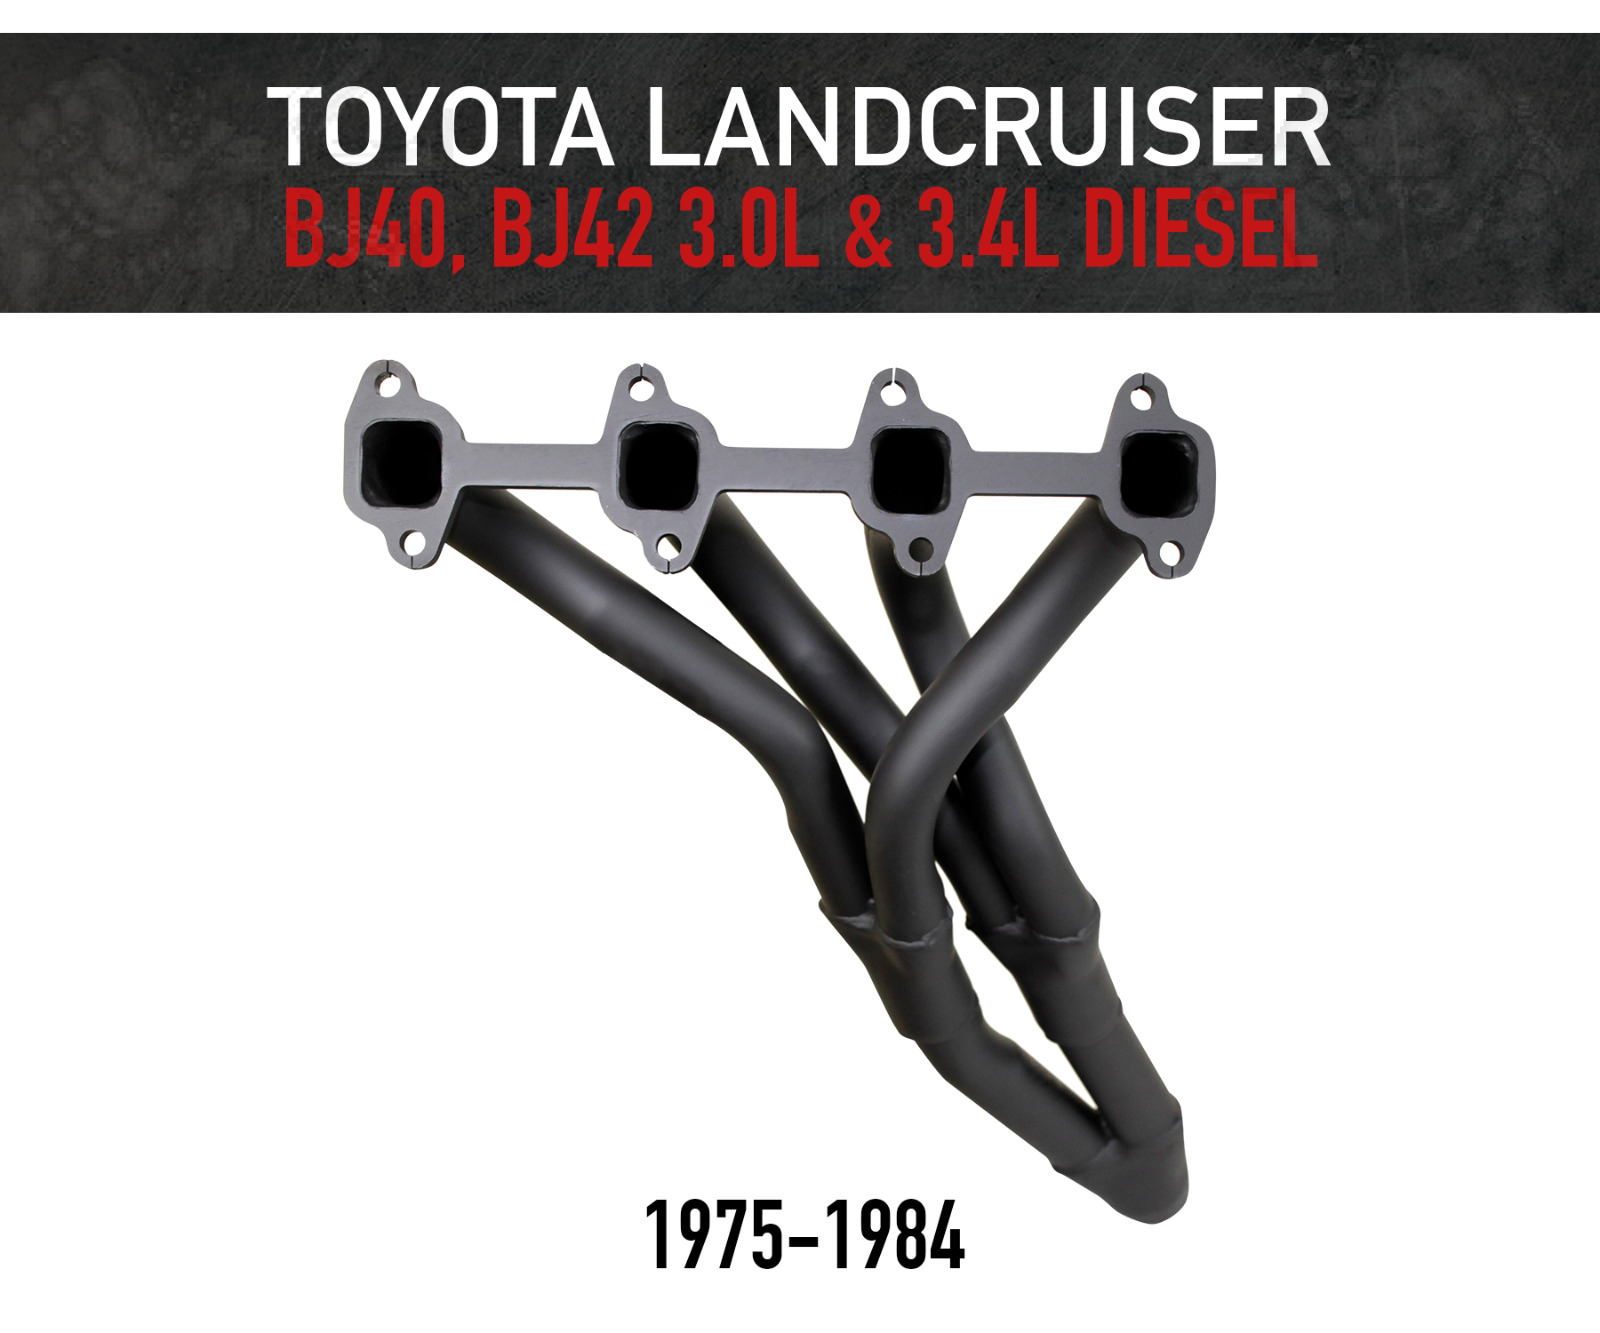 Headers / Extractors for Toyota Landcruiser BJ40 and BJ42 with 3.0L or 3.4L